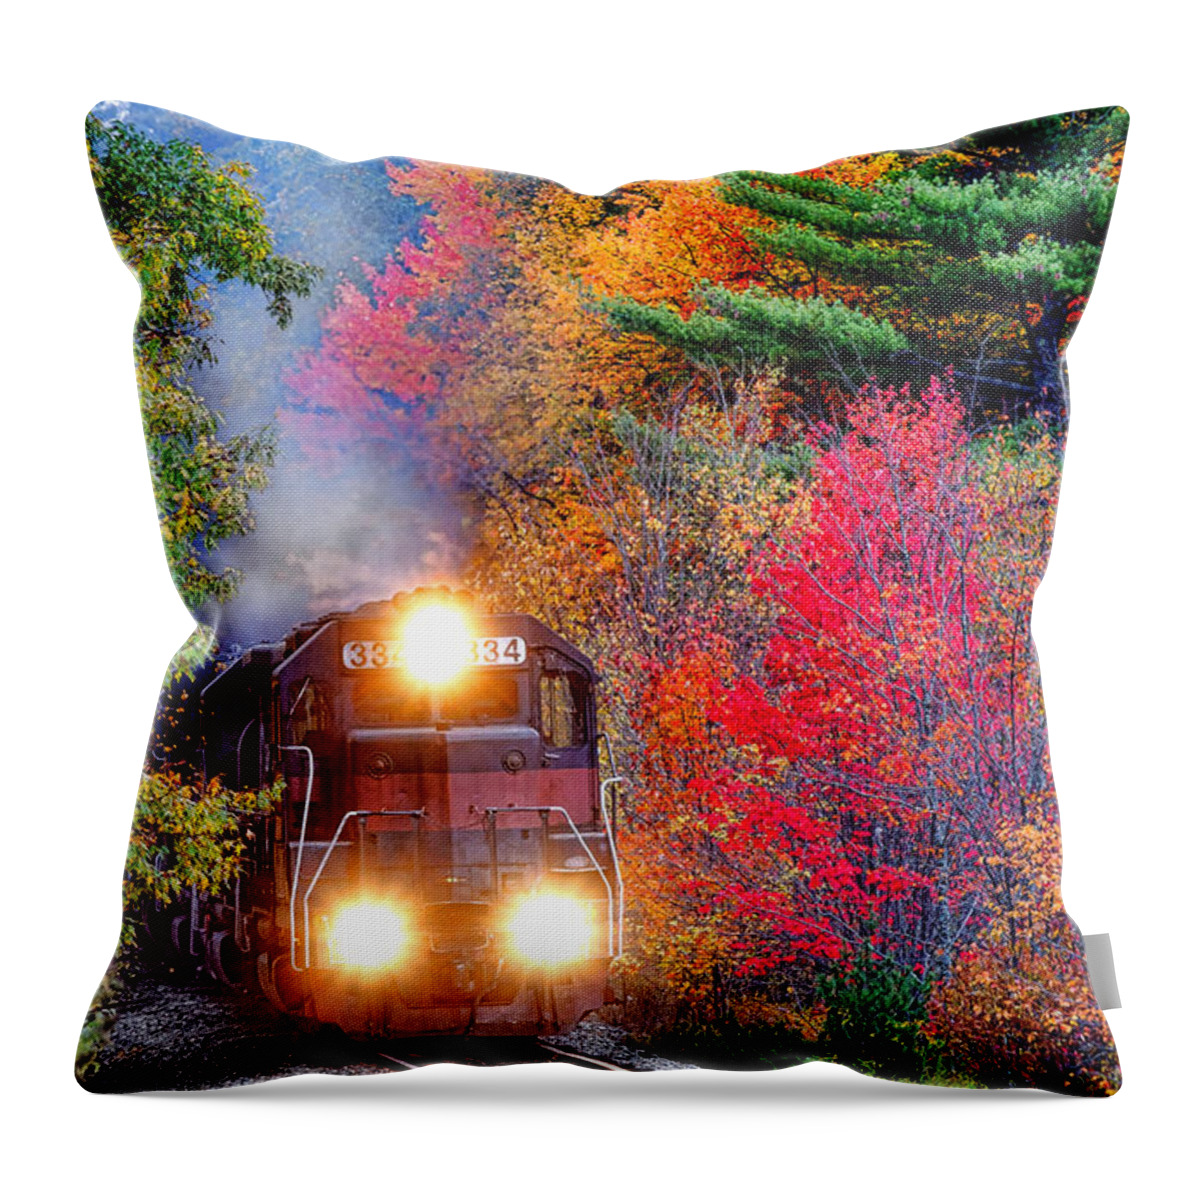 Diesel Throw Pillow featuring the photograph Autumn Locomotive by Olivier Le Queinec